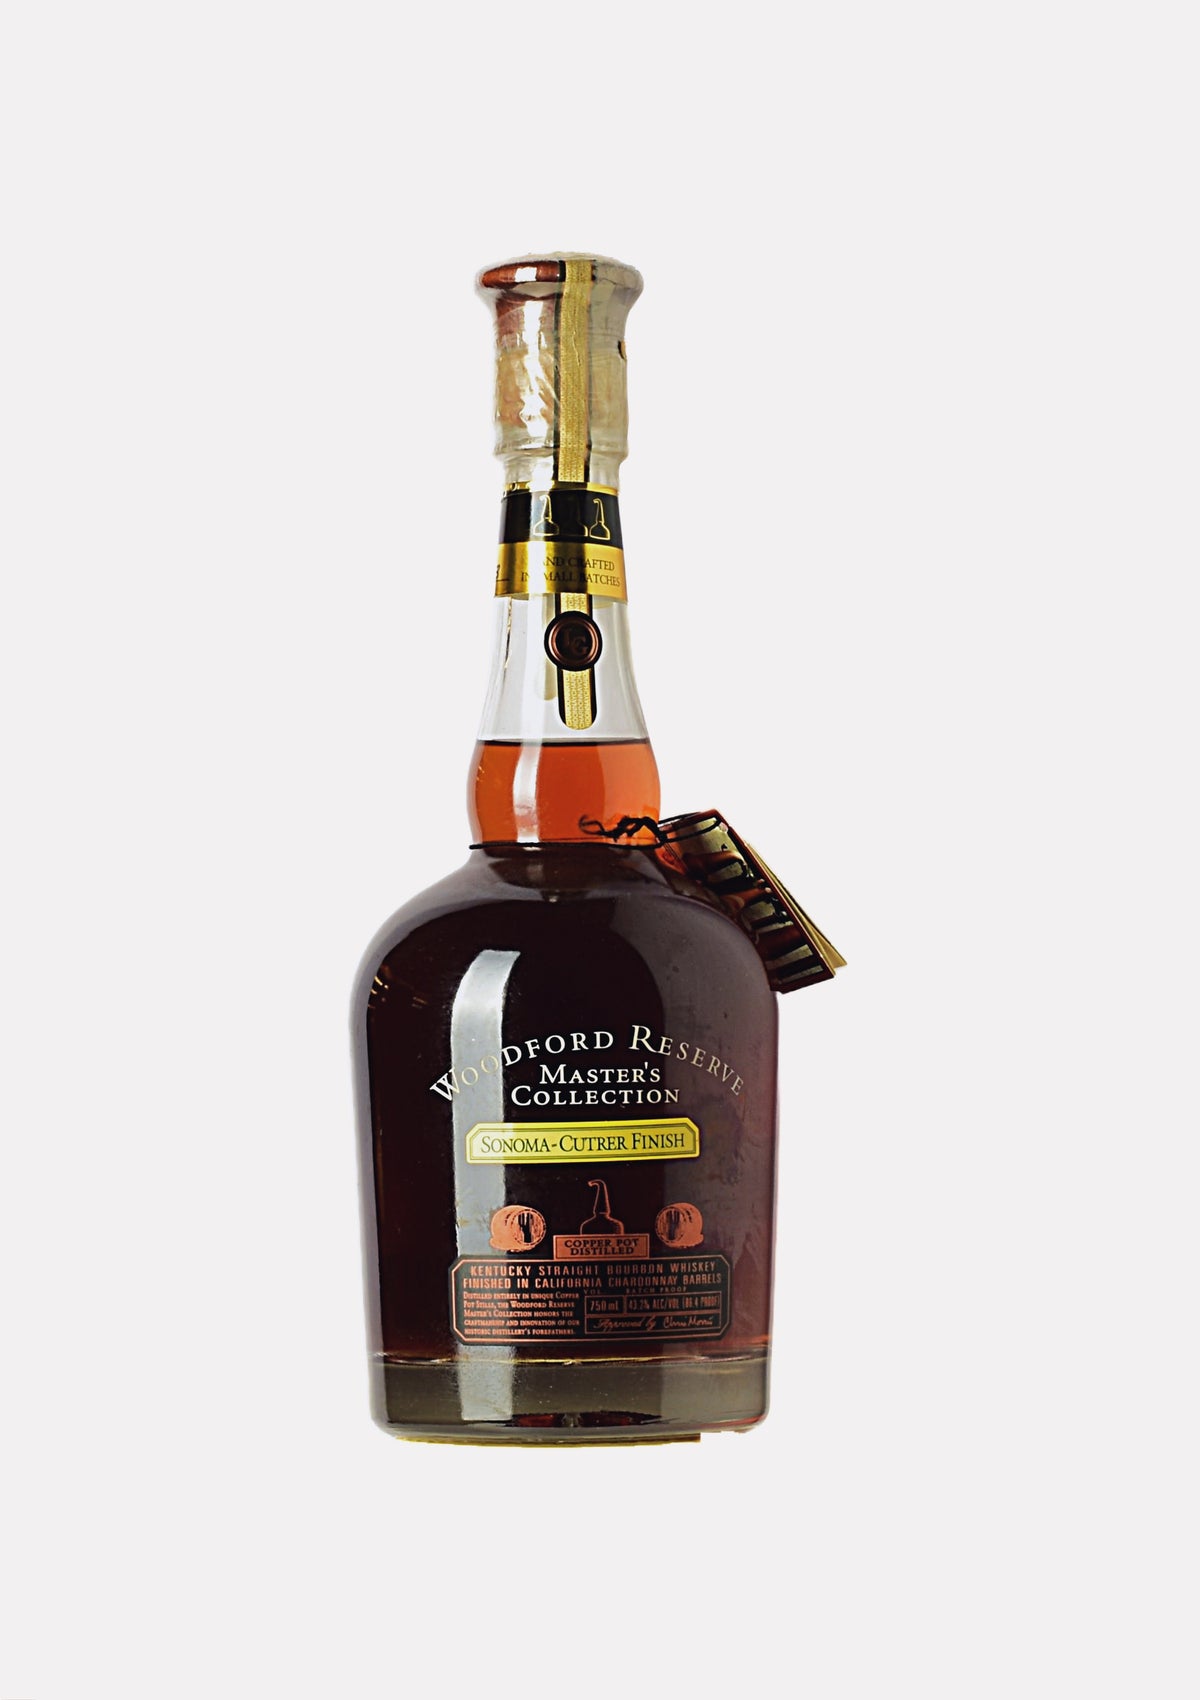 Woodford Reserve Master`s Collection Sonoma-Cutrer Finish